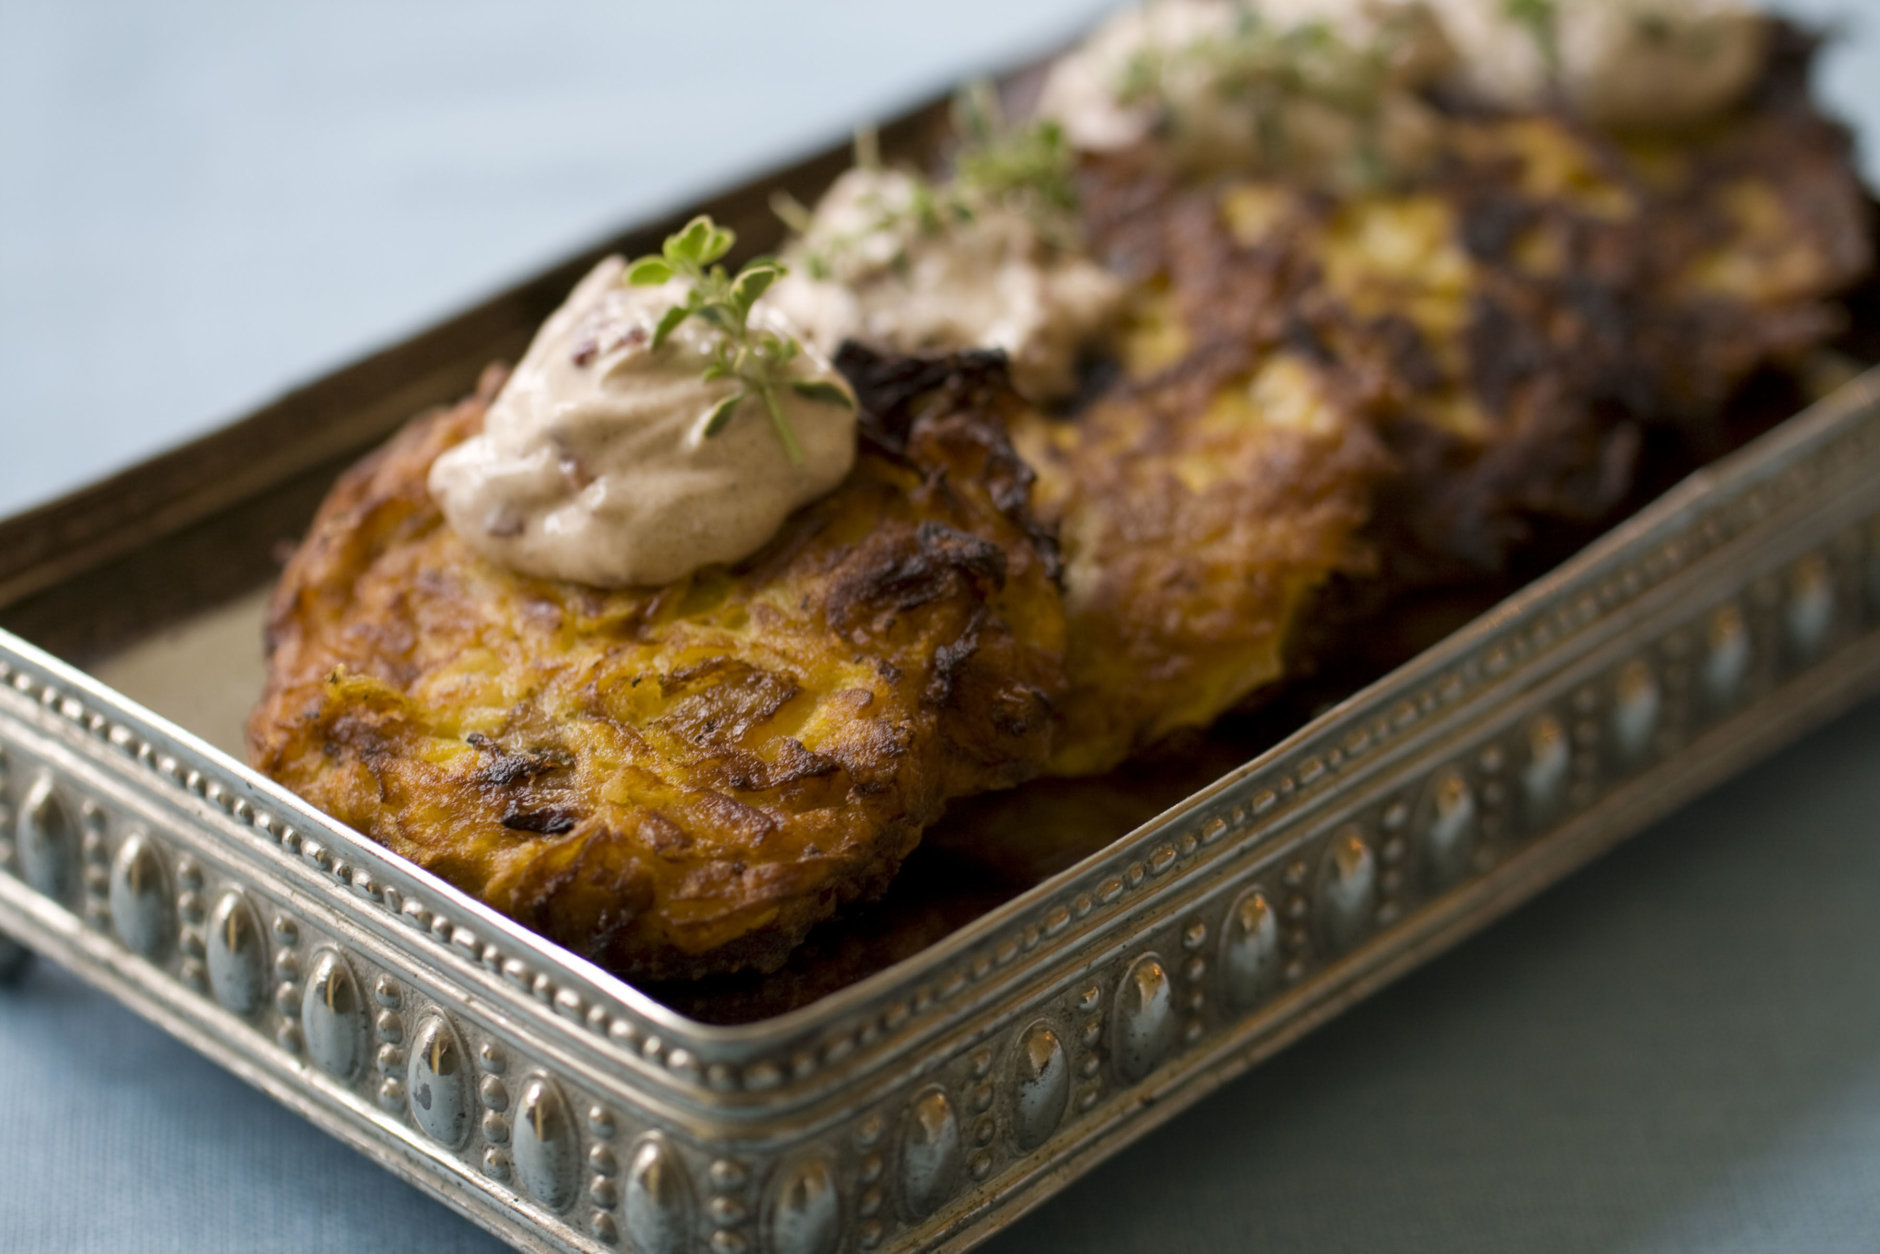 This Oct. 7, 2013 photo shows pumpkin latkes with spiced cranberry sour cream in Concord, N.H. Though potatoes have their own symbolism in the Jewish holiday of Hanukkah, it is the oil used in the frying that is particularly significant; it symbolizes the long-lasting oil burned in the temple lamps in the story of Hanukkah. And that is why there are so many latke variations, including sweet potato, onion and carrot. (AP Photo/Matthew Mead)